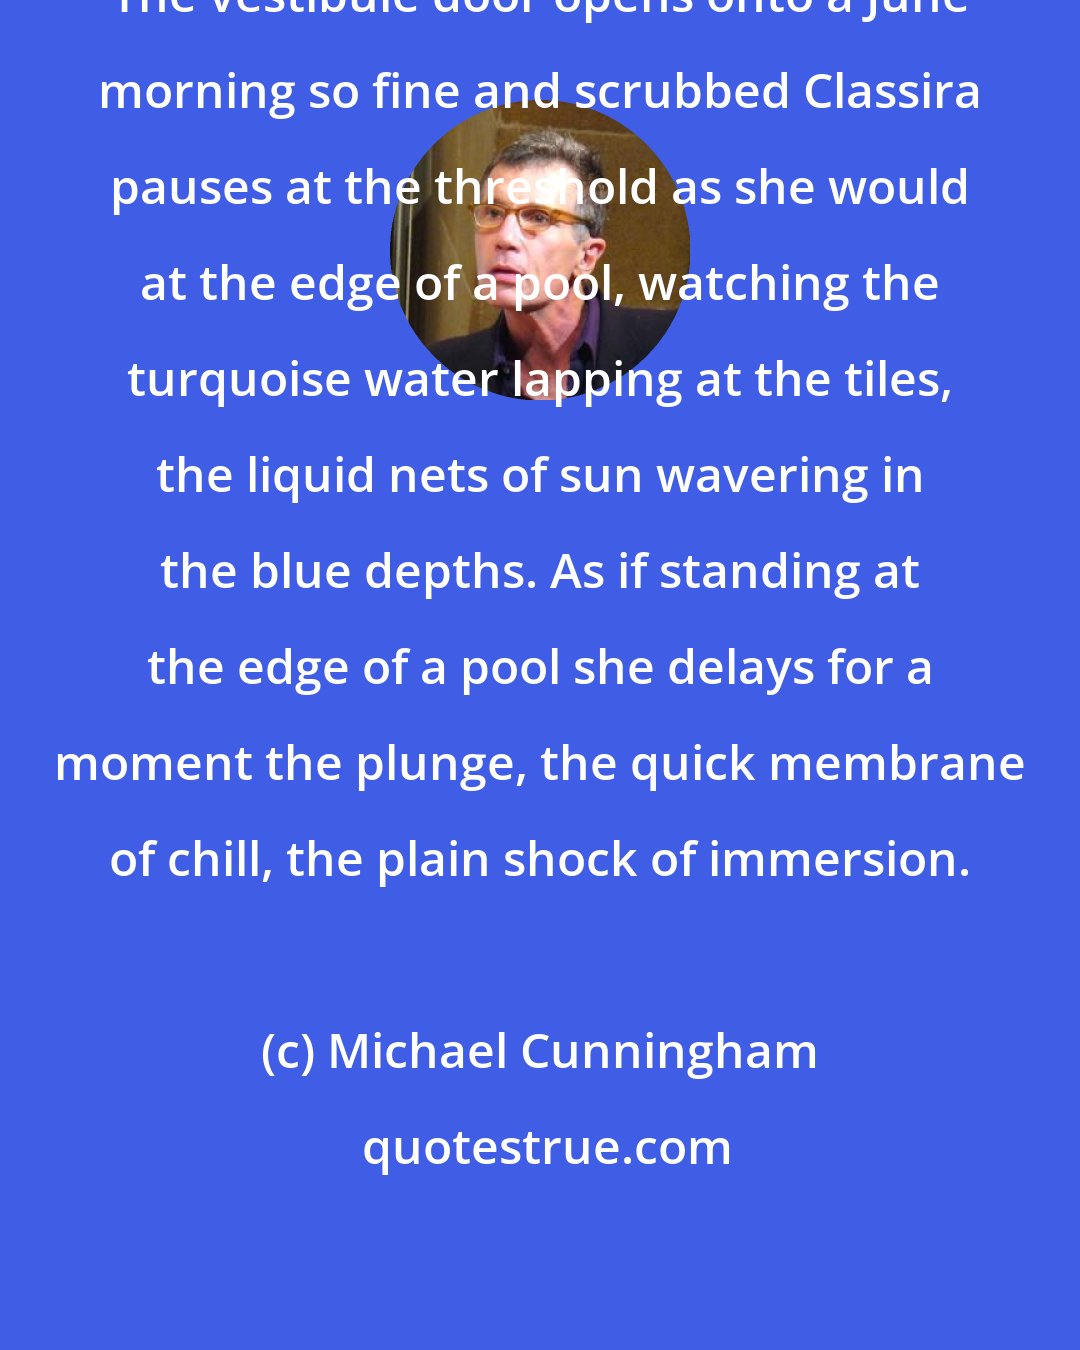 Michael Cunningham: The vestibule door opens onto a June morning so fine and scrubbed Classira pauses at the threshold as she would at the edge of a pool, watching the turquoise water lapping at the tiles, the liquid nets of sun wavering in the blue depths. As if standing at the edge of a pool she delays for a moment the plunge, the quick membrane of chill, the plain shock of immersion.